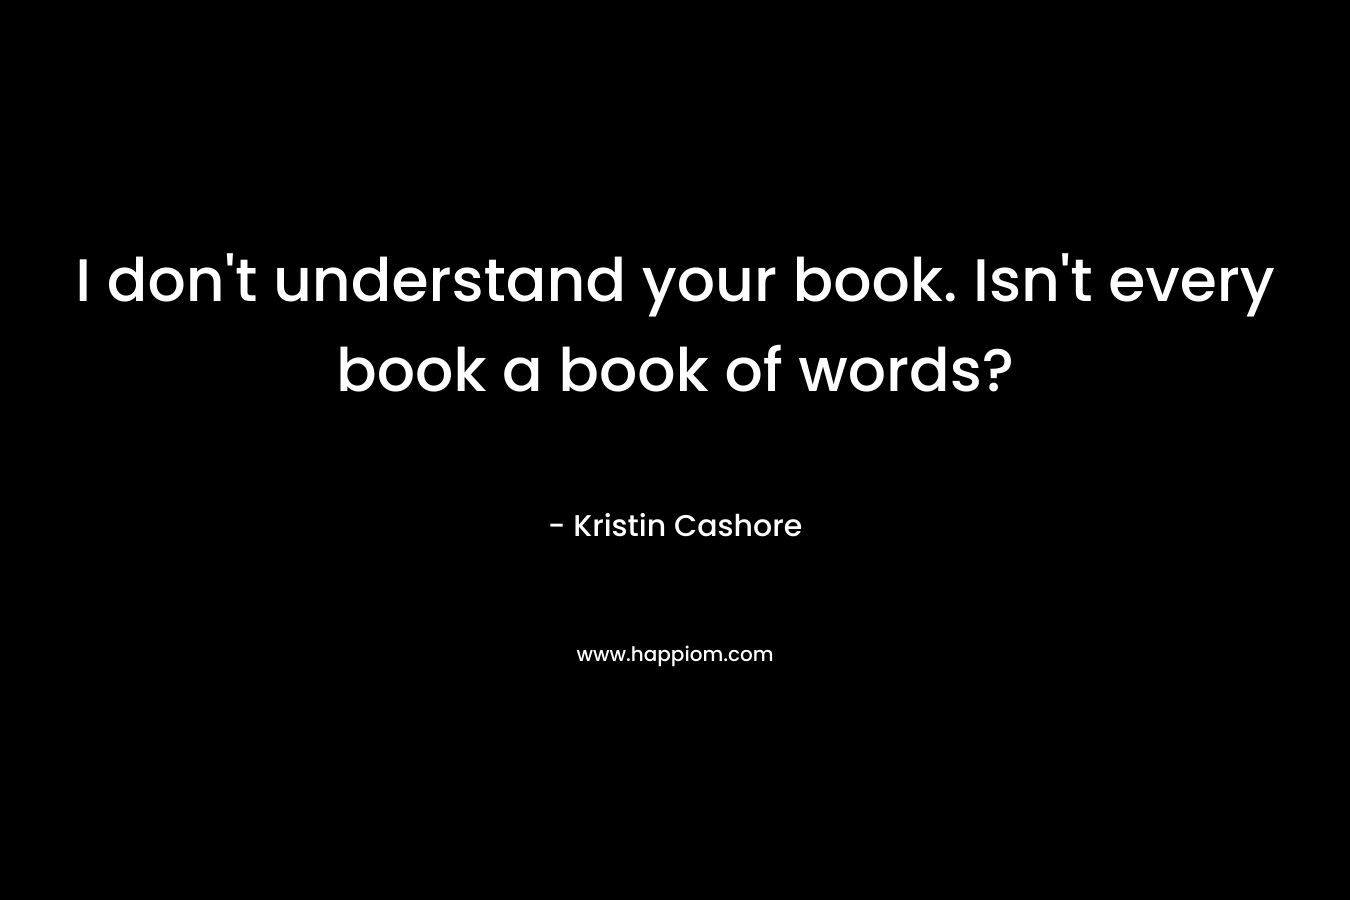 I don't understand your book. Isn't every book a book of words?